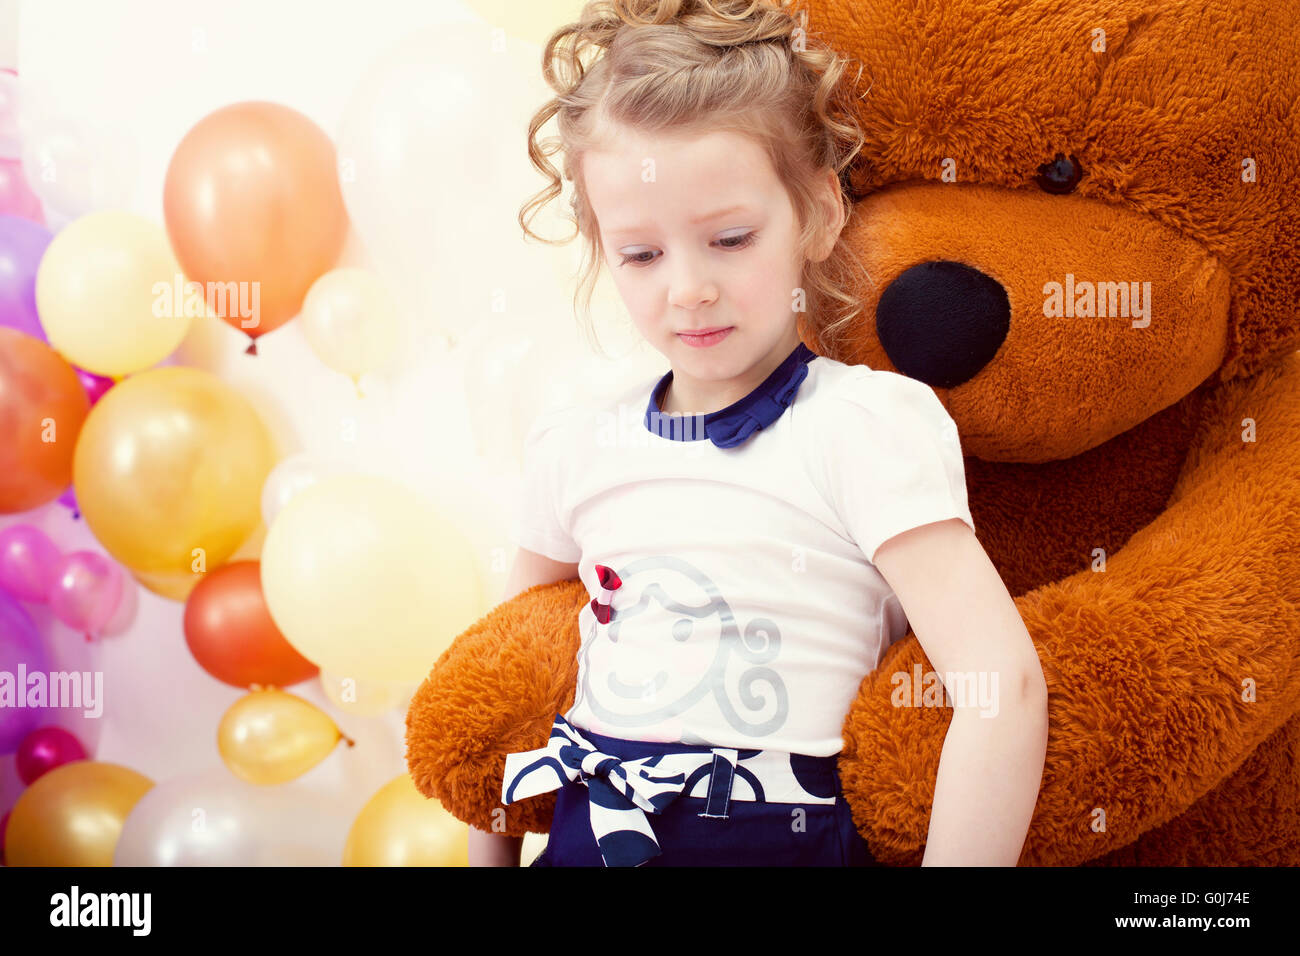 Cute girl posing in embrace with big teddy bear Stock Photo